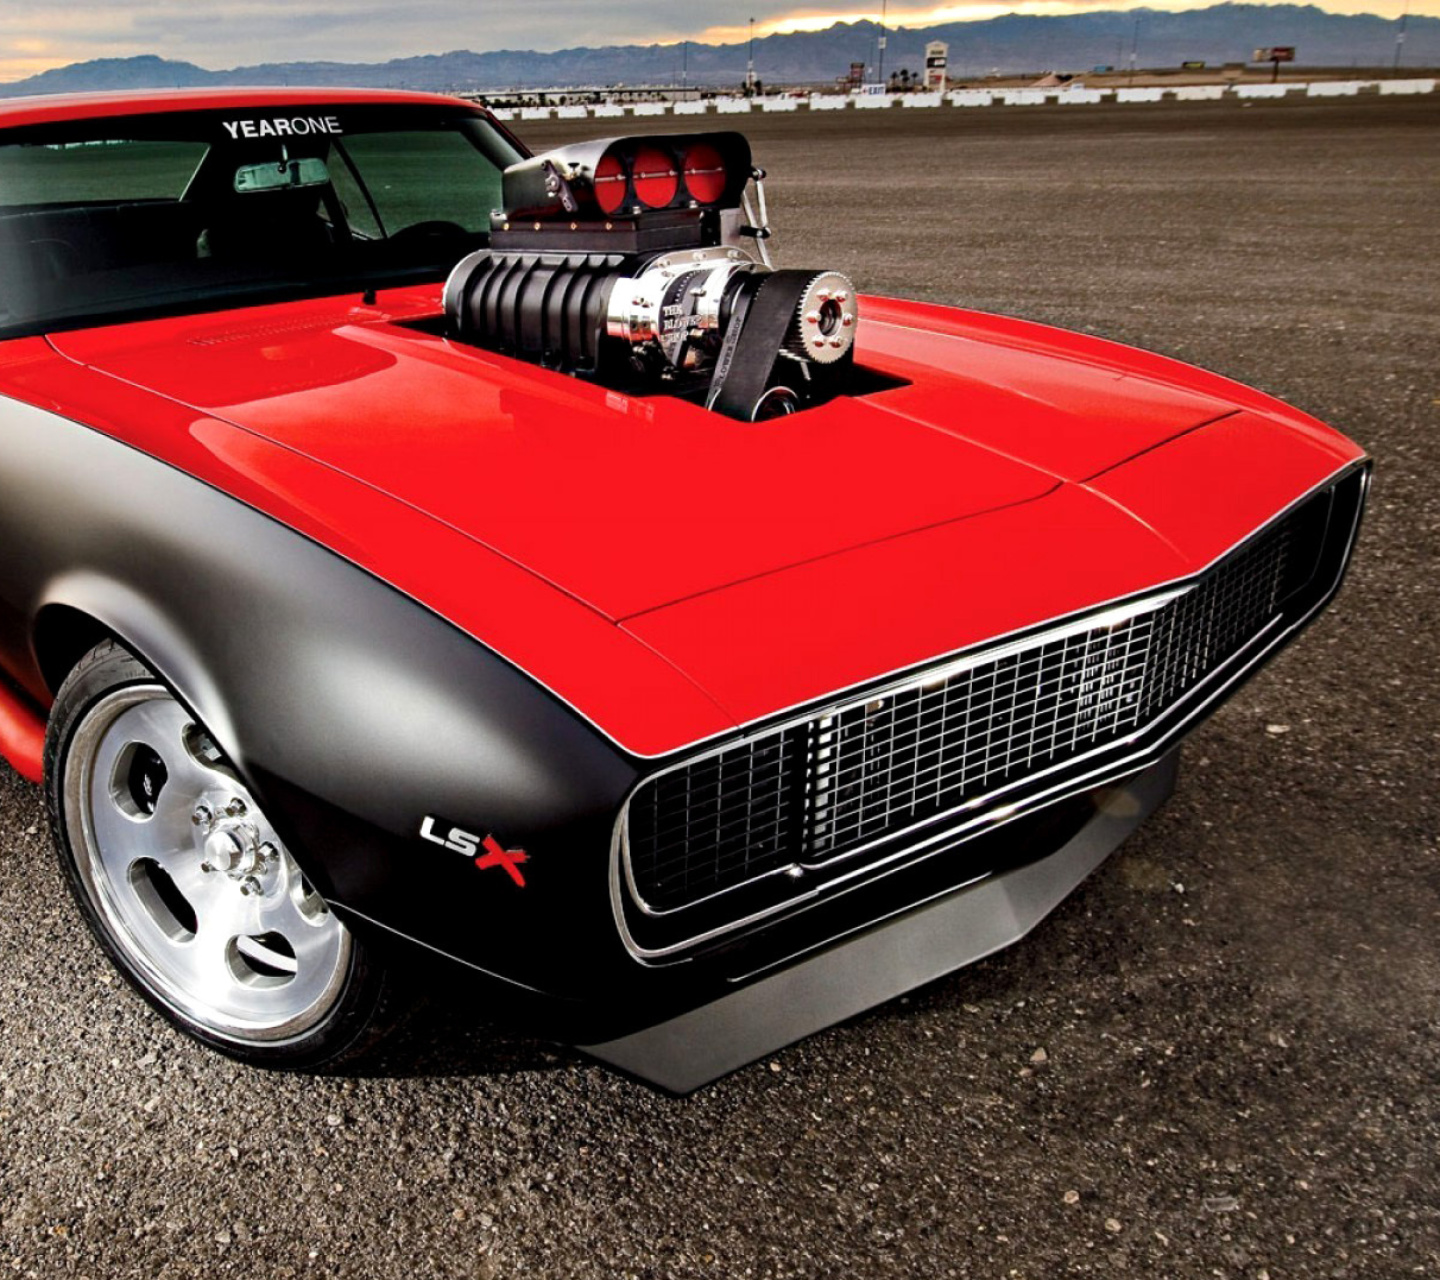 Chevrolet Hot Rod Muscle Car with GM Engine screenshot #1 1440x1280